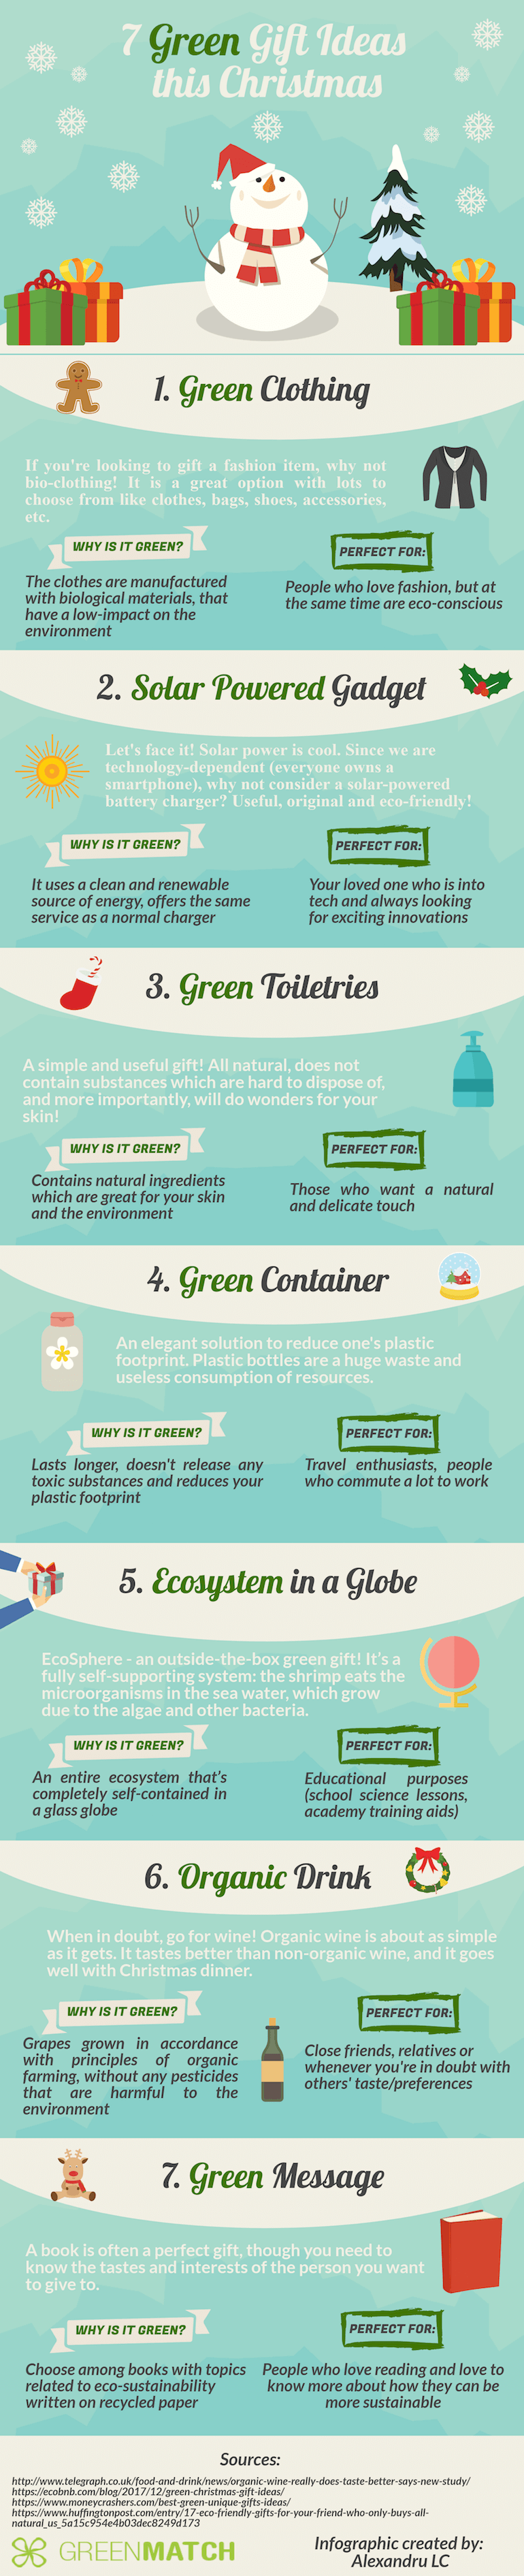 Infographic about 7 green gift ideas for Christmas